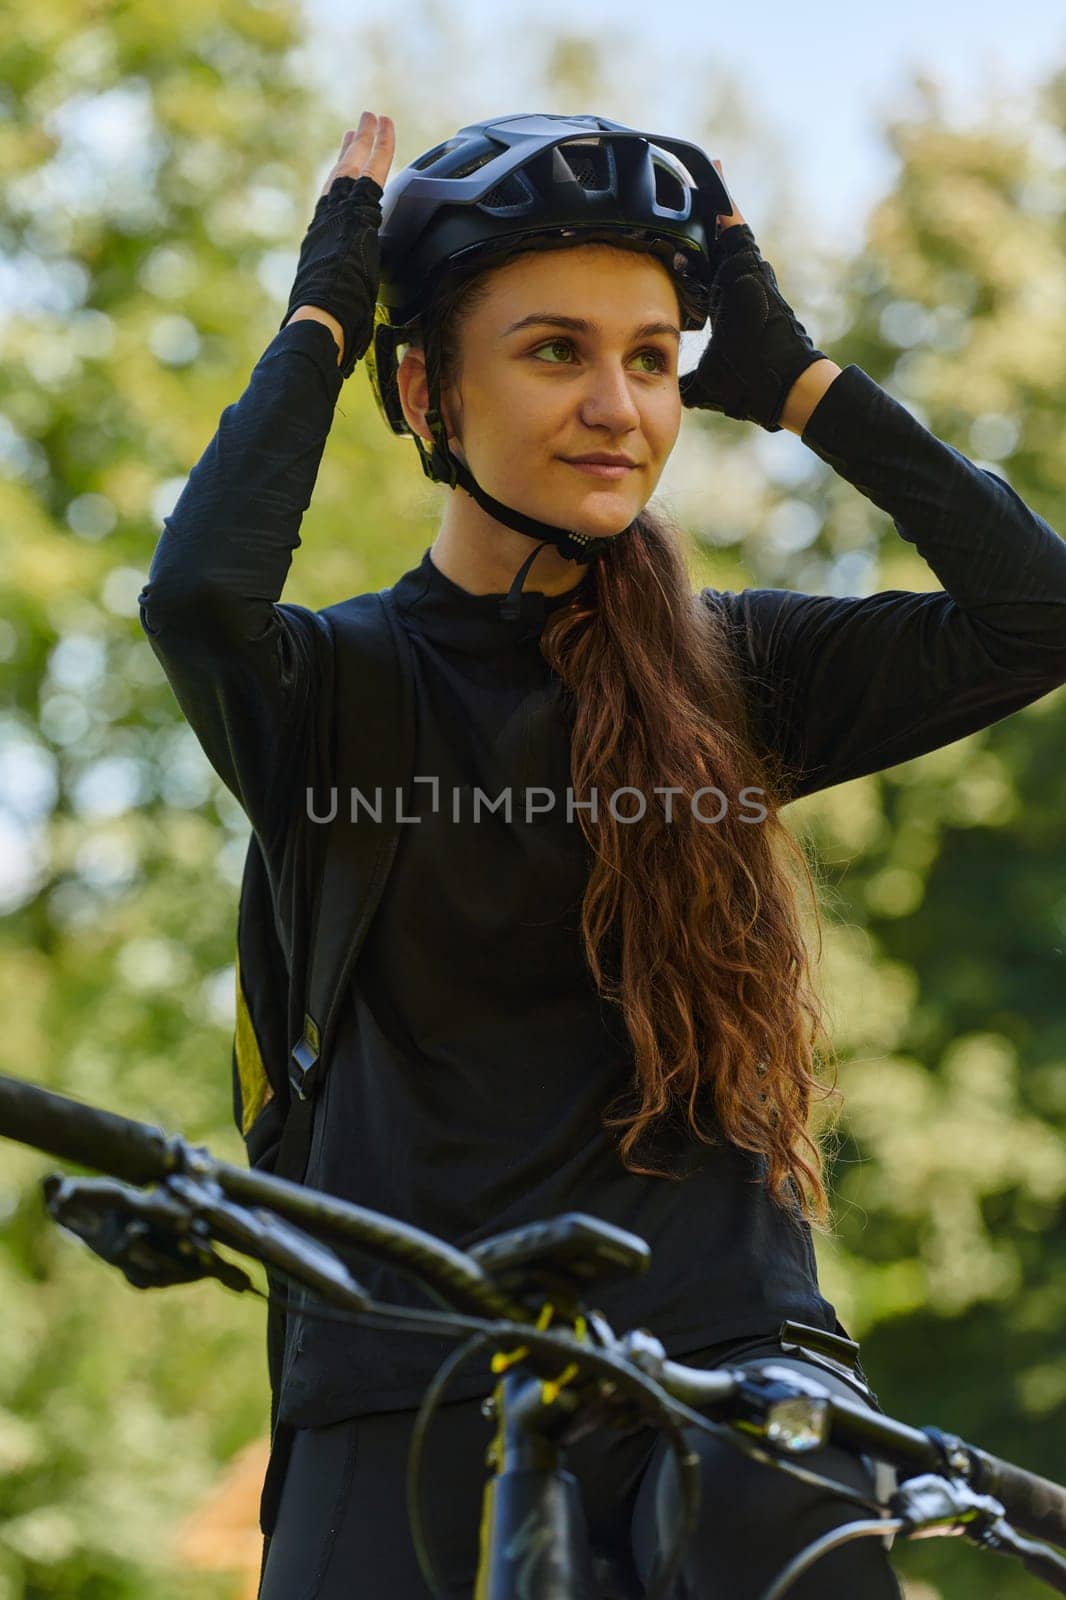 In the radiant embrace of a sunny day, a joyous girl, adorned in professional cycling gear, finds pure bliss and vitality as she cruises through the park on her bicycle, her infectious laughter echoing the carefree harmony of the moment by dotshock